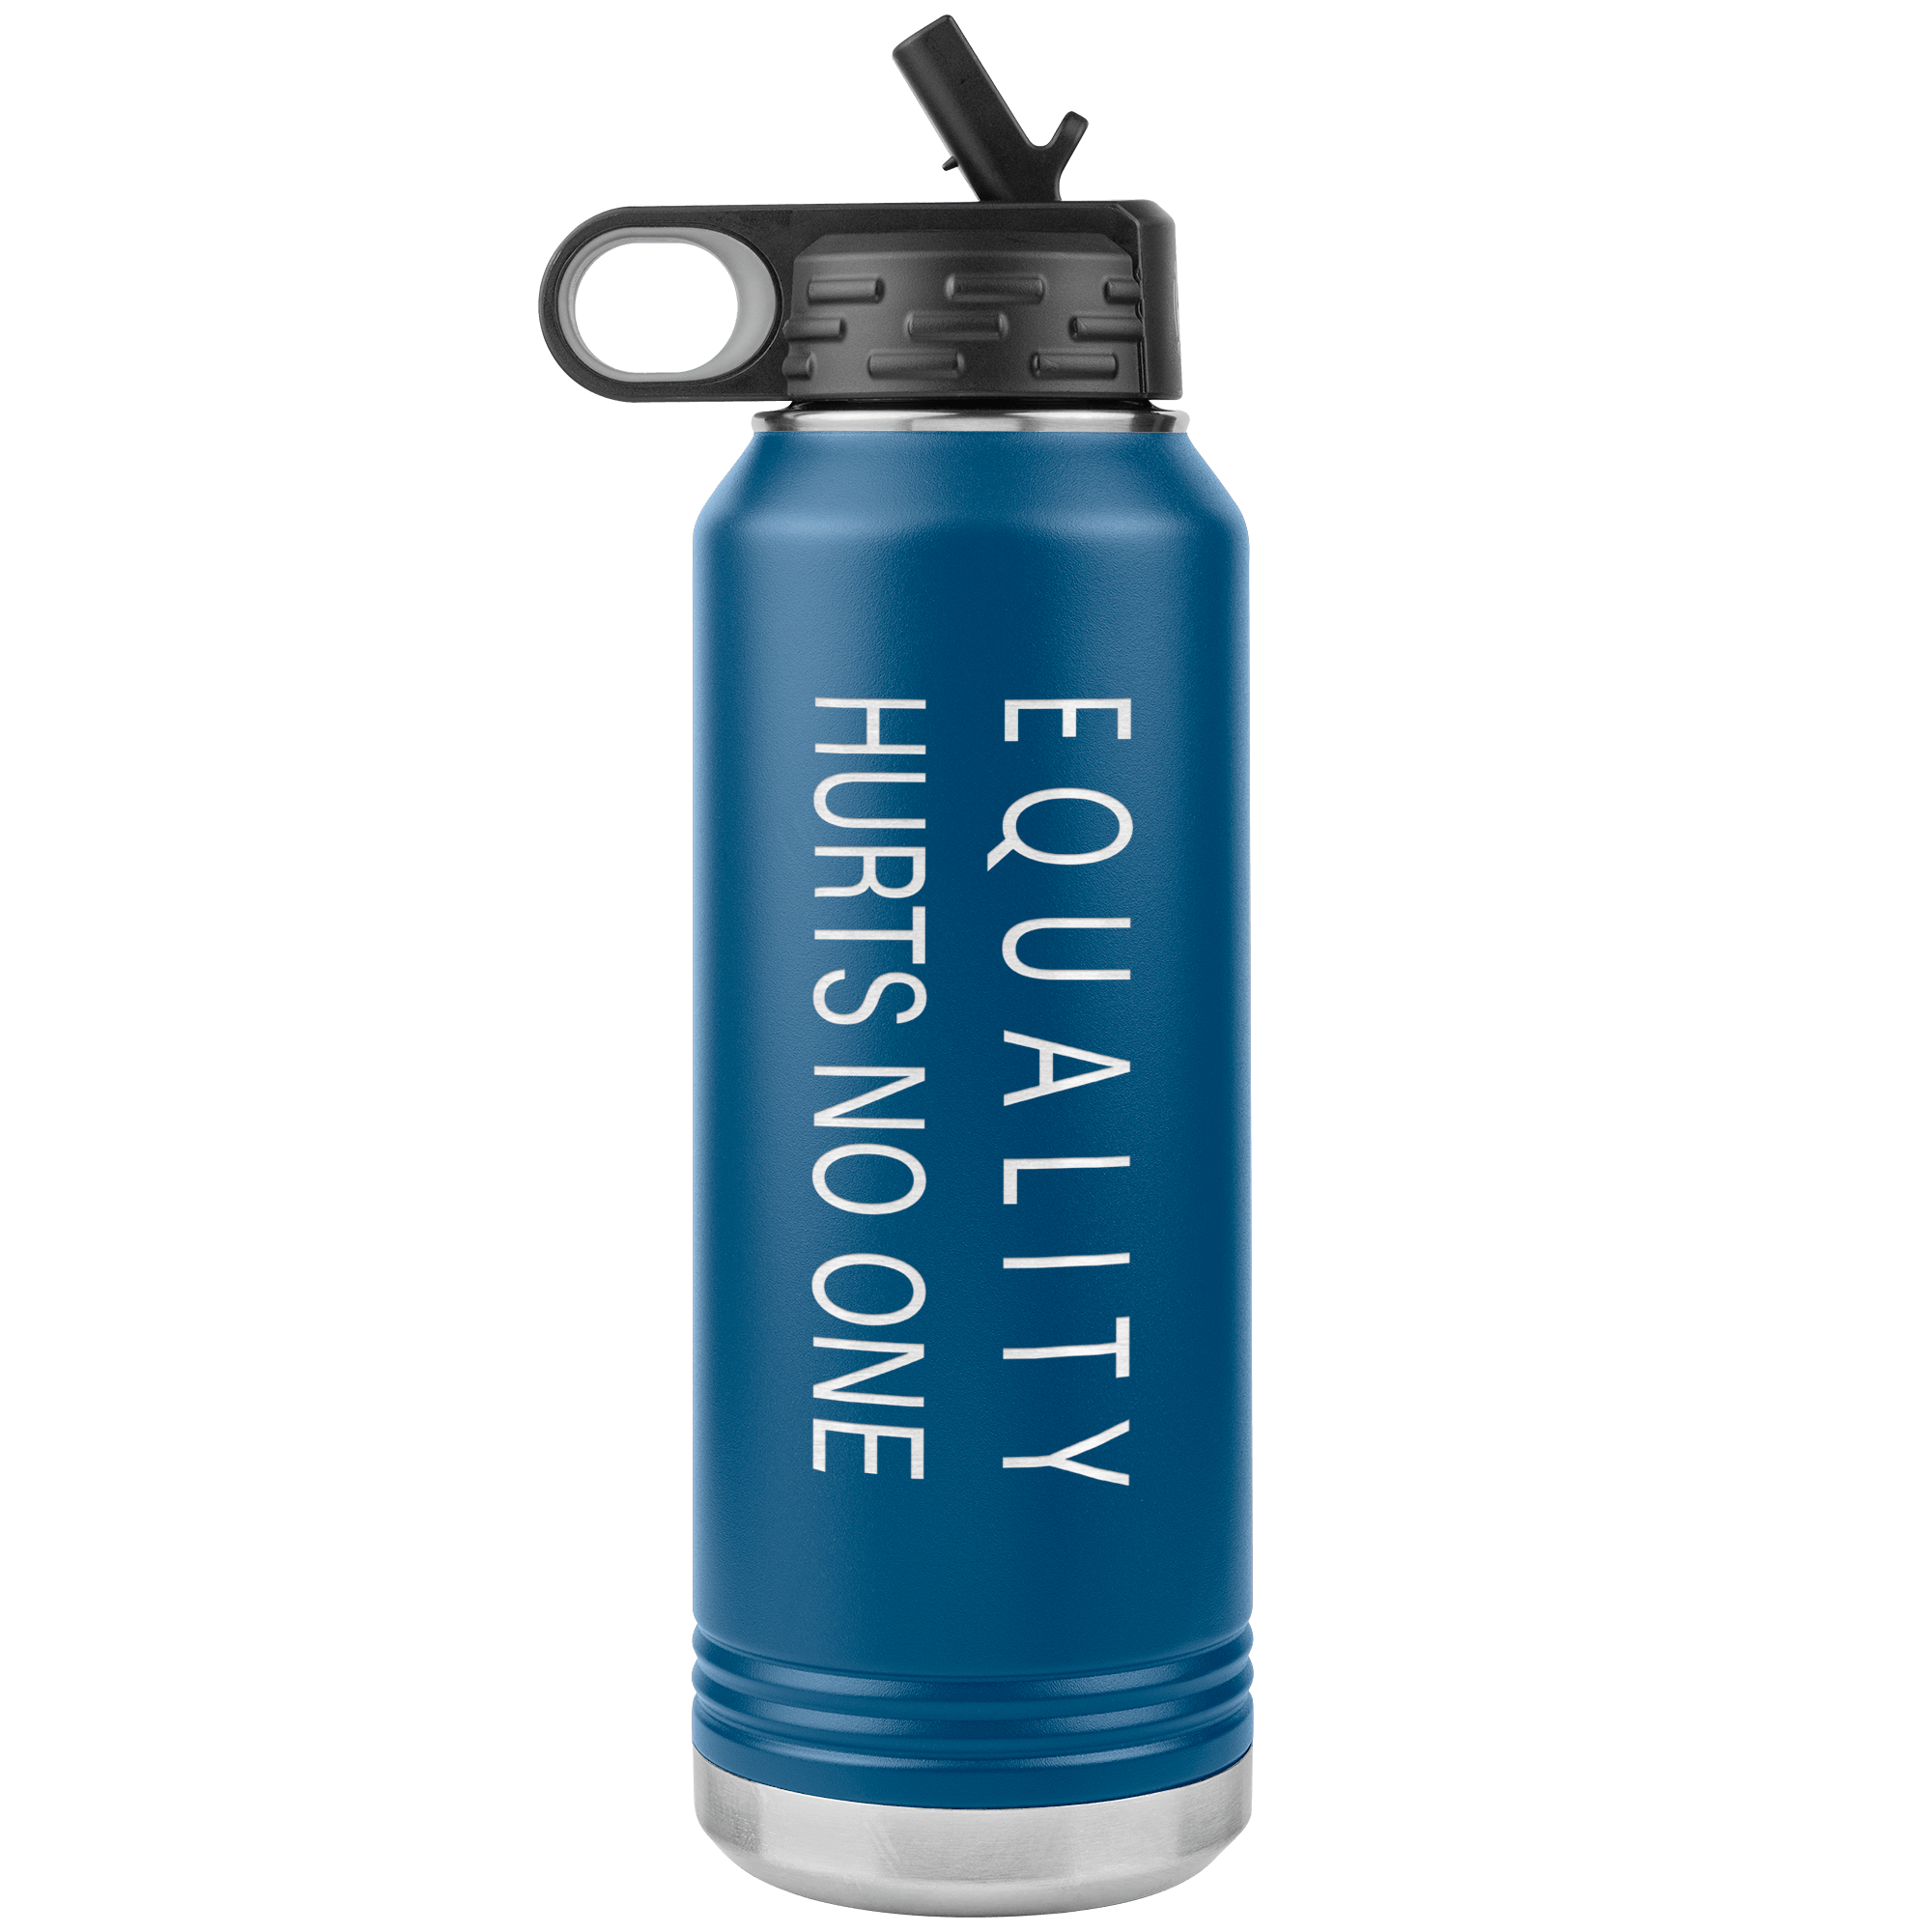 "Equality Hurts No One", Water Bottle.